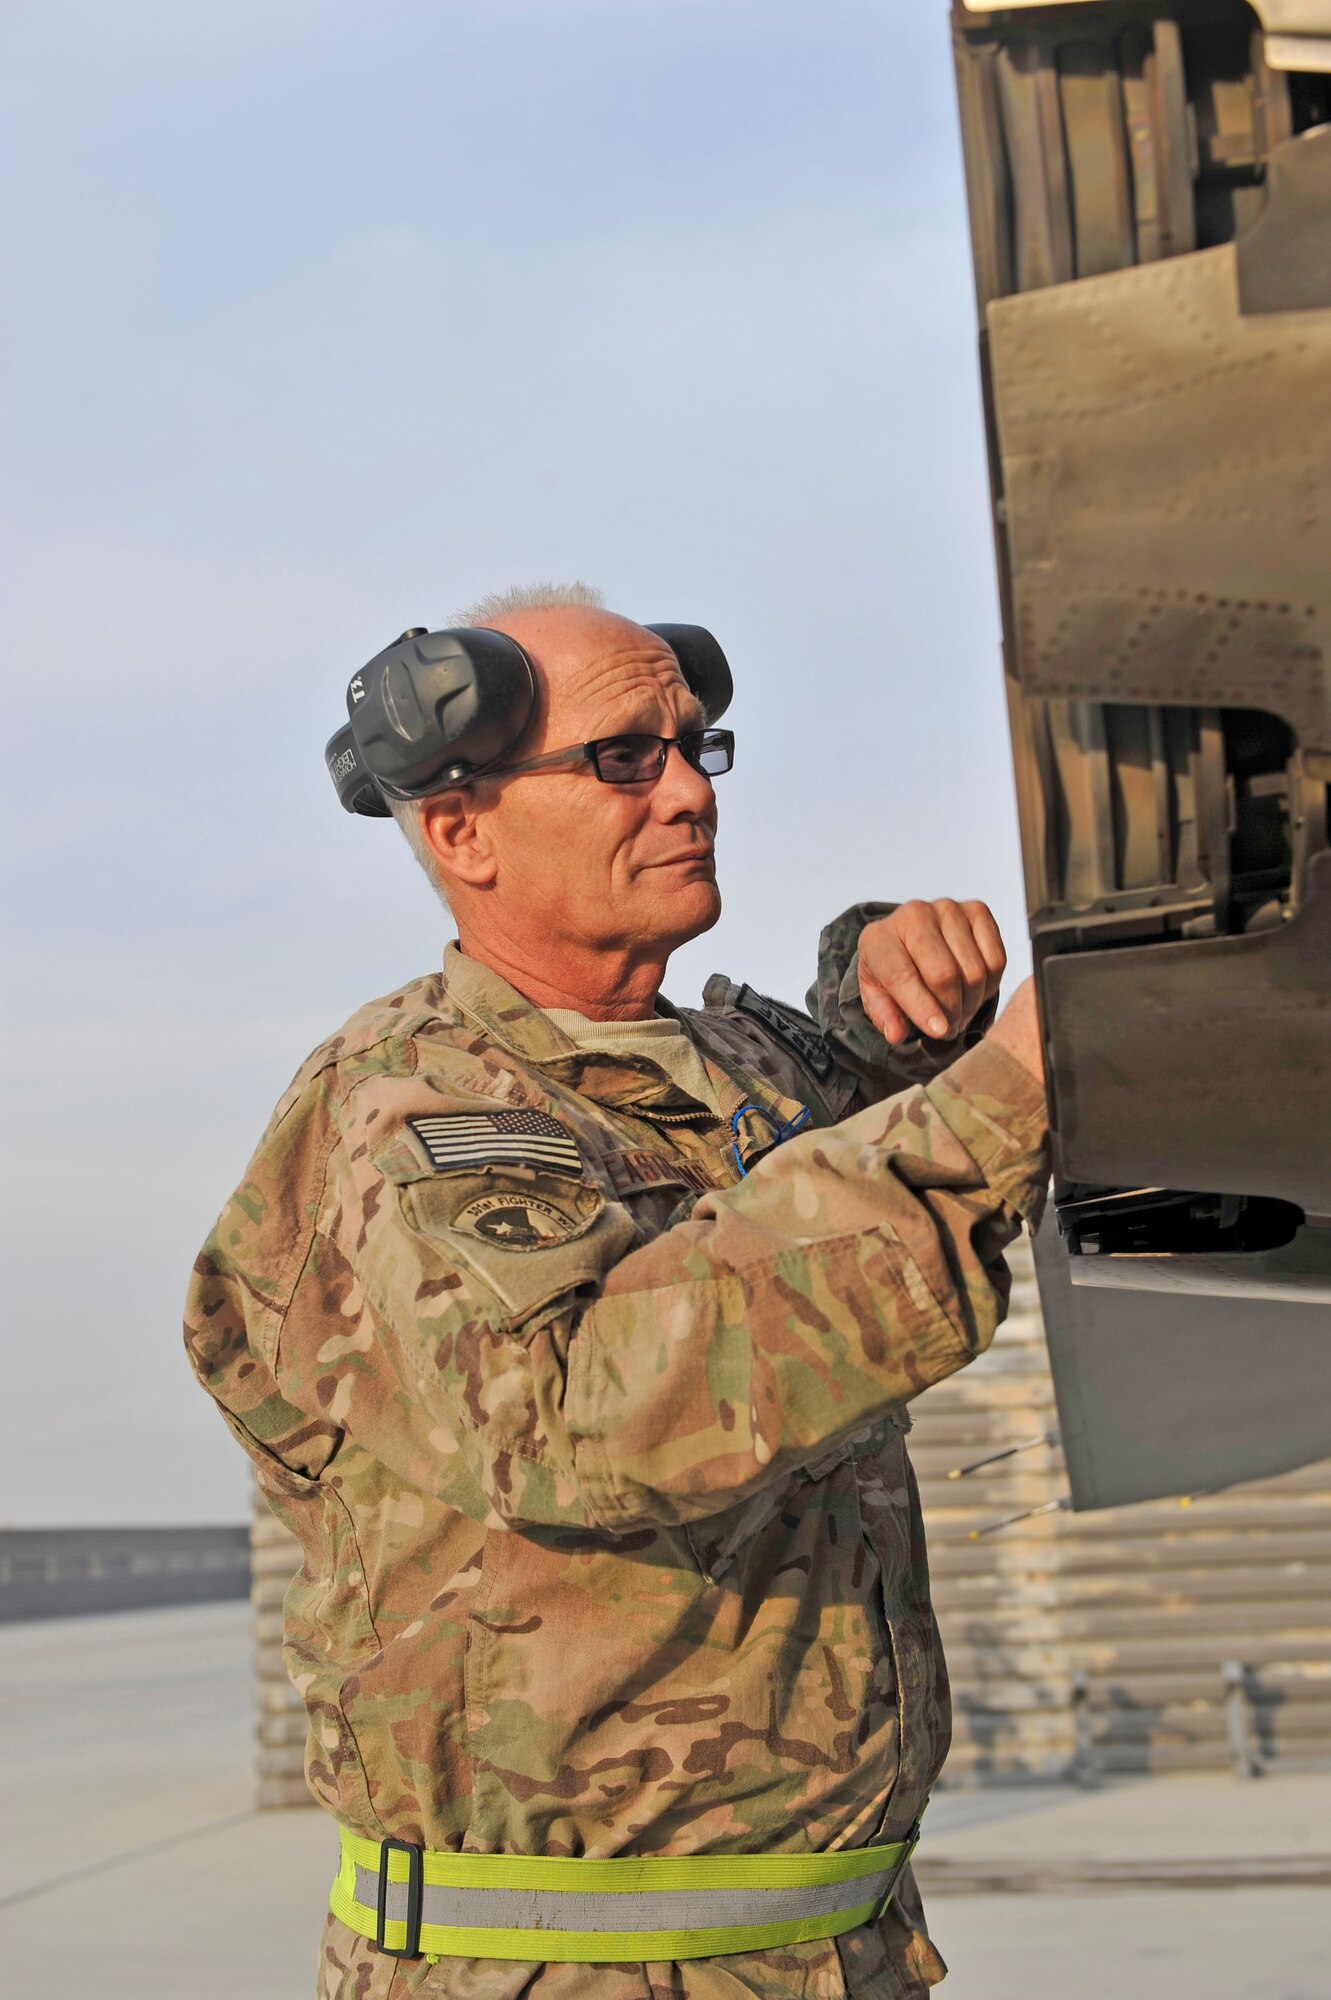 U.S. Air Force Master Sgt. Doyle Easterling glances inside an F-16 shortly after a test run at Bagram Airfield, Afghanistan, Jan. 20, 2014. Easterling is deployed out of Carswell Joint Reserve Base in Fort Worth, Texas to Bagram, and will be retiring this year after 36 years of military service. (U.S. Air Force photo by Senior Master Sgt. Gary J. Rihn/Released)